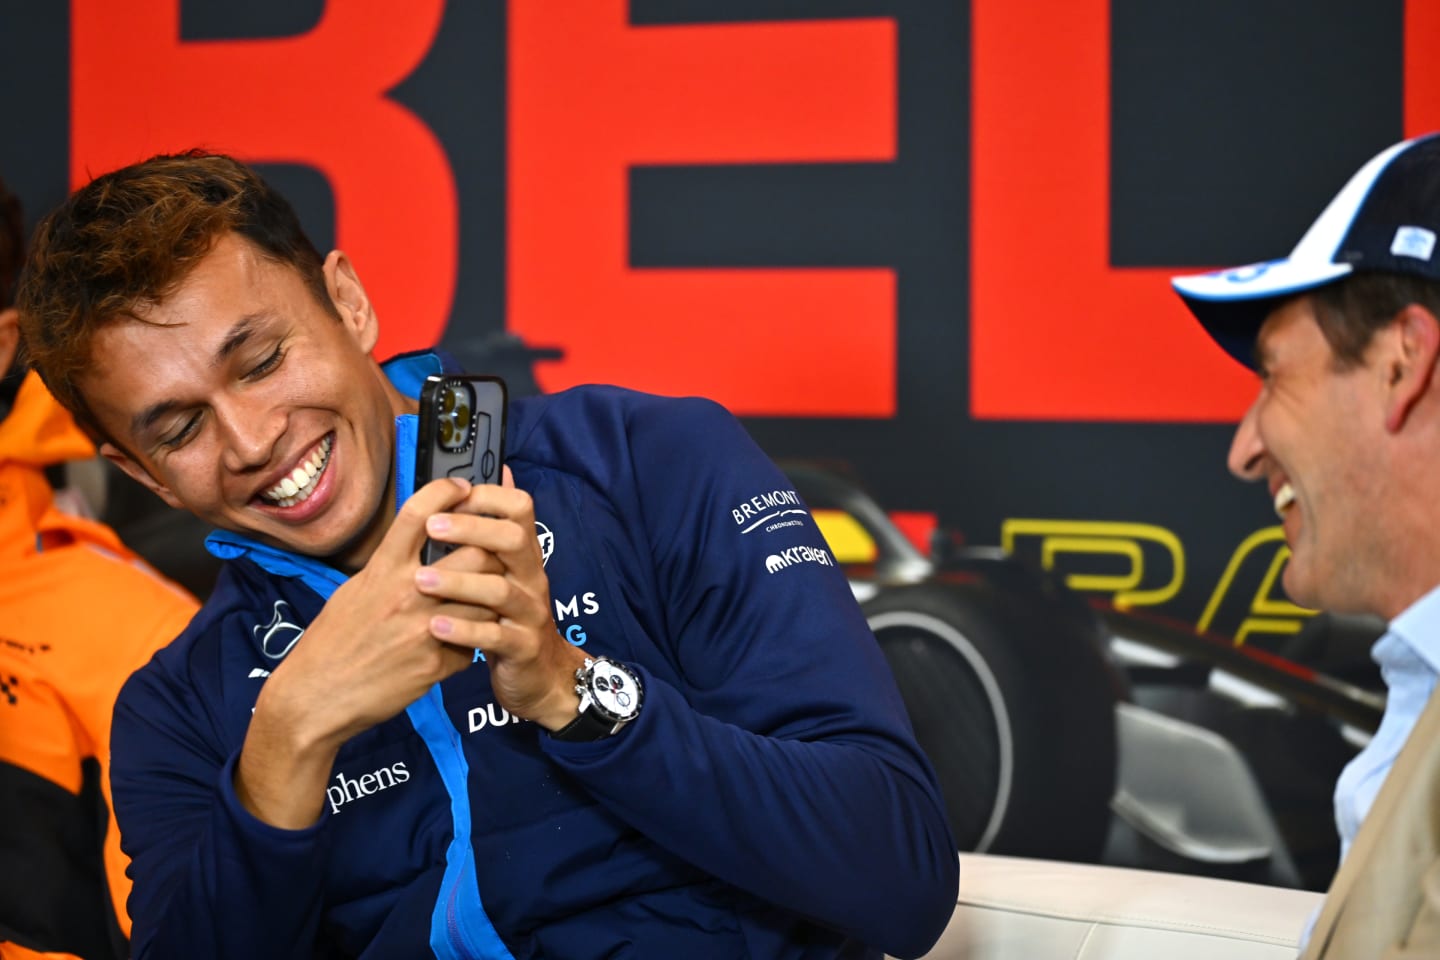 SPA, BELGIUM - JULY 27: Alexander Albon of Thailand and Williams takes a photo of Tom Clarkson wearing his hat in the Drivers Press Conference during previews ahead of the F1 Grand Prix of Belgium at Circuit de Spa-Francorchamps on July 27, 2023 in Spa, Belgium. (Photo by Dan Mullan/Getty Images)